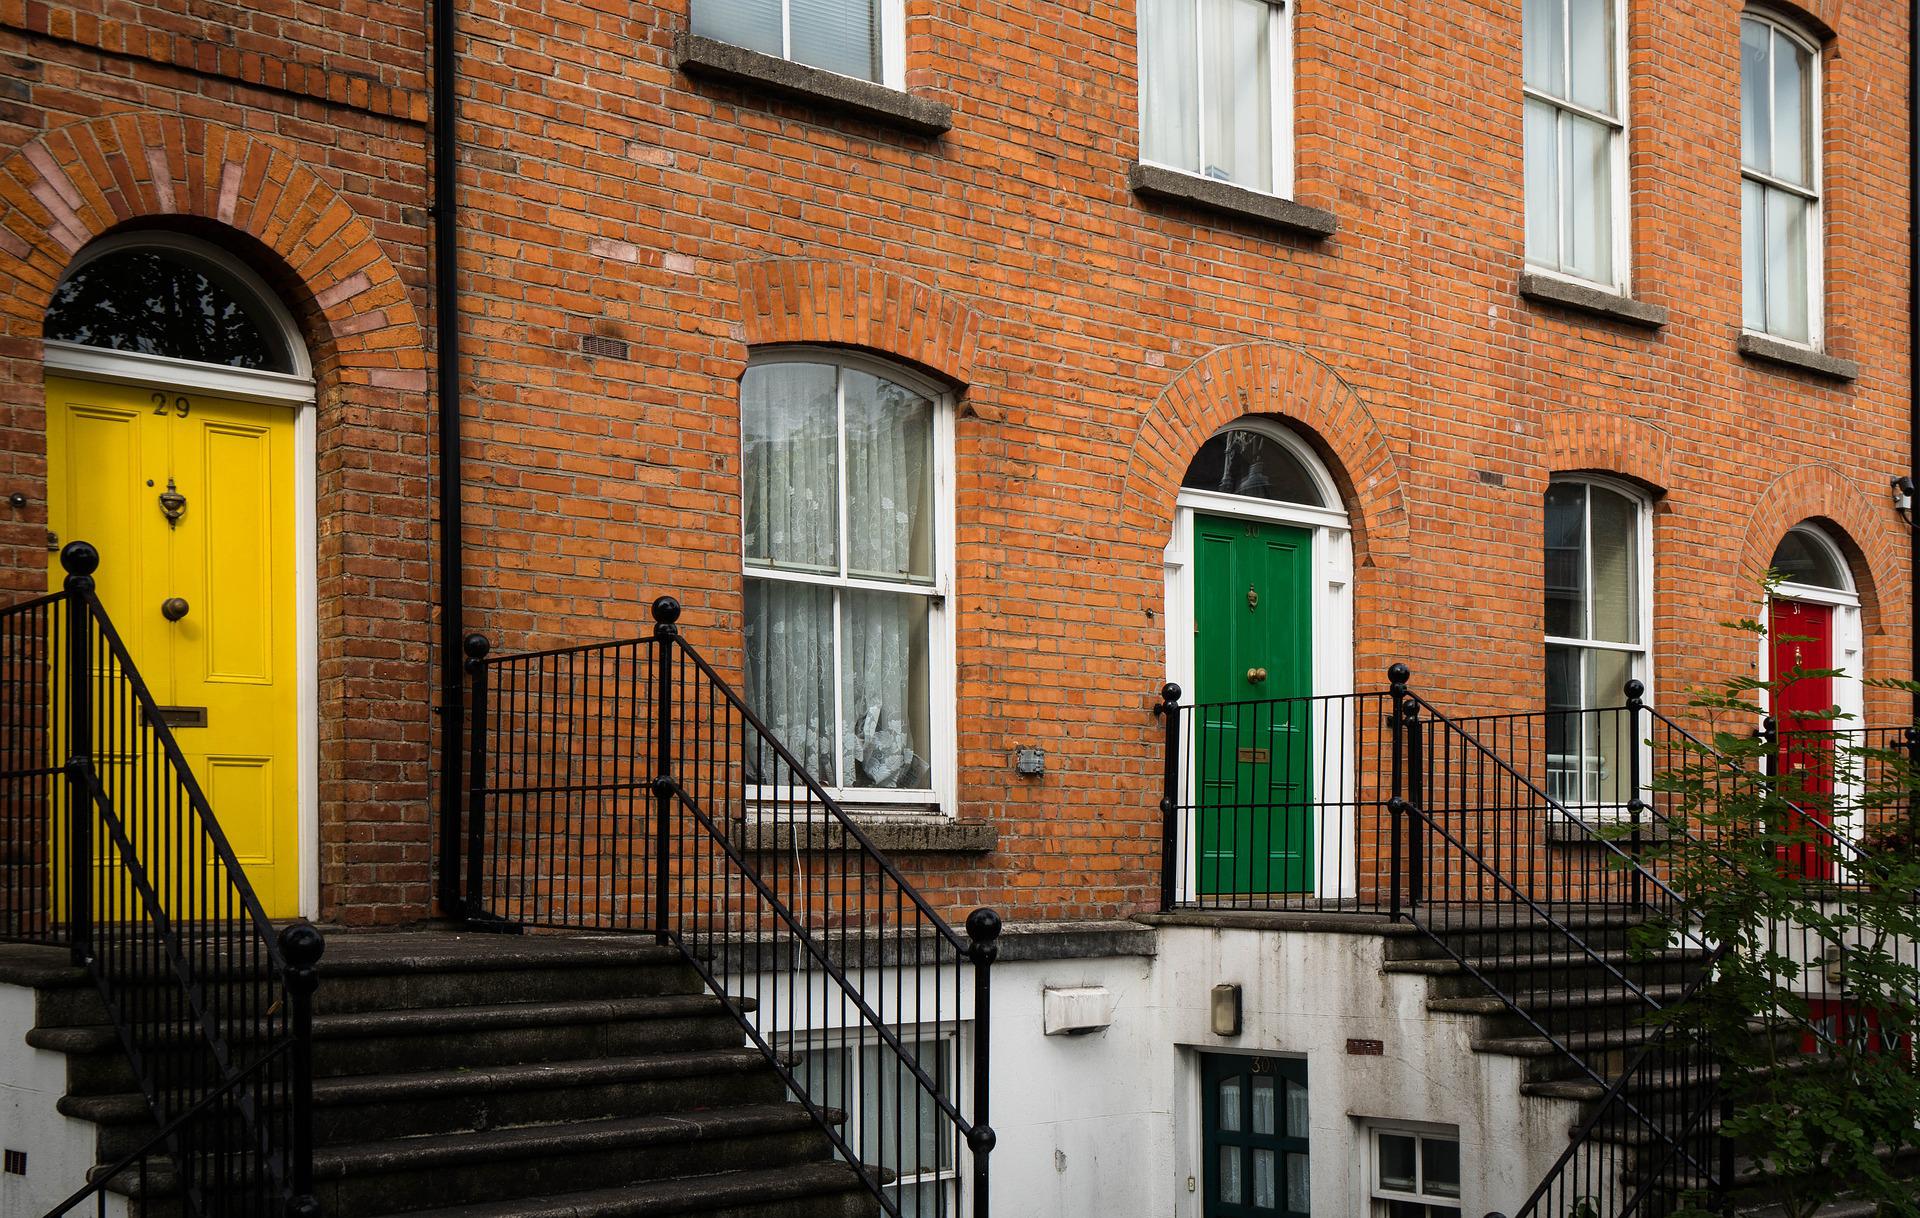 Dublin is famous for its colourful doors